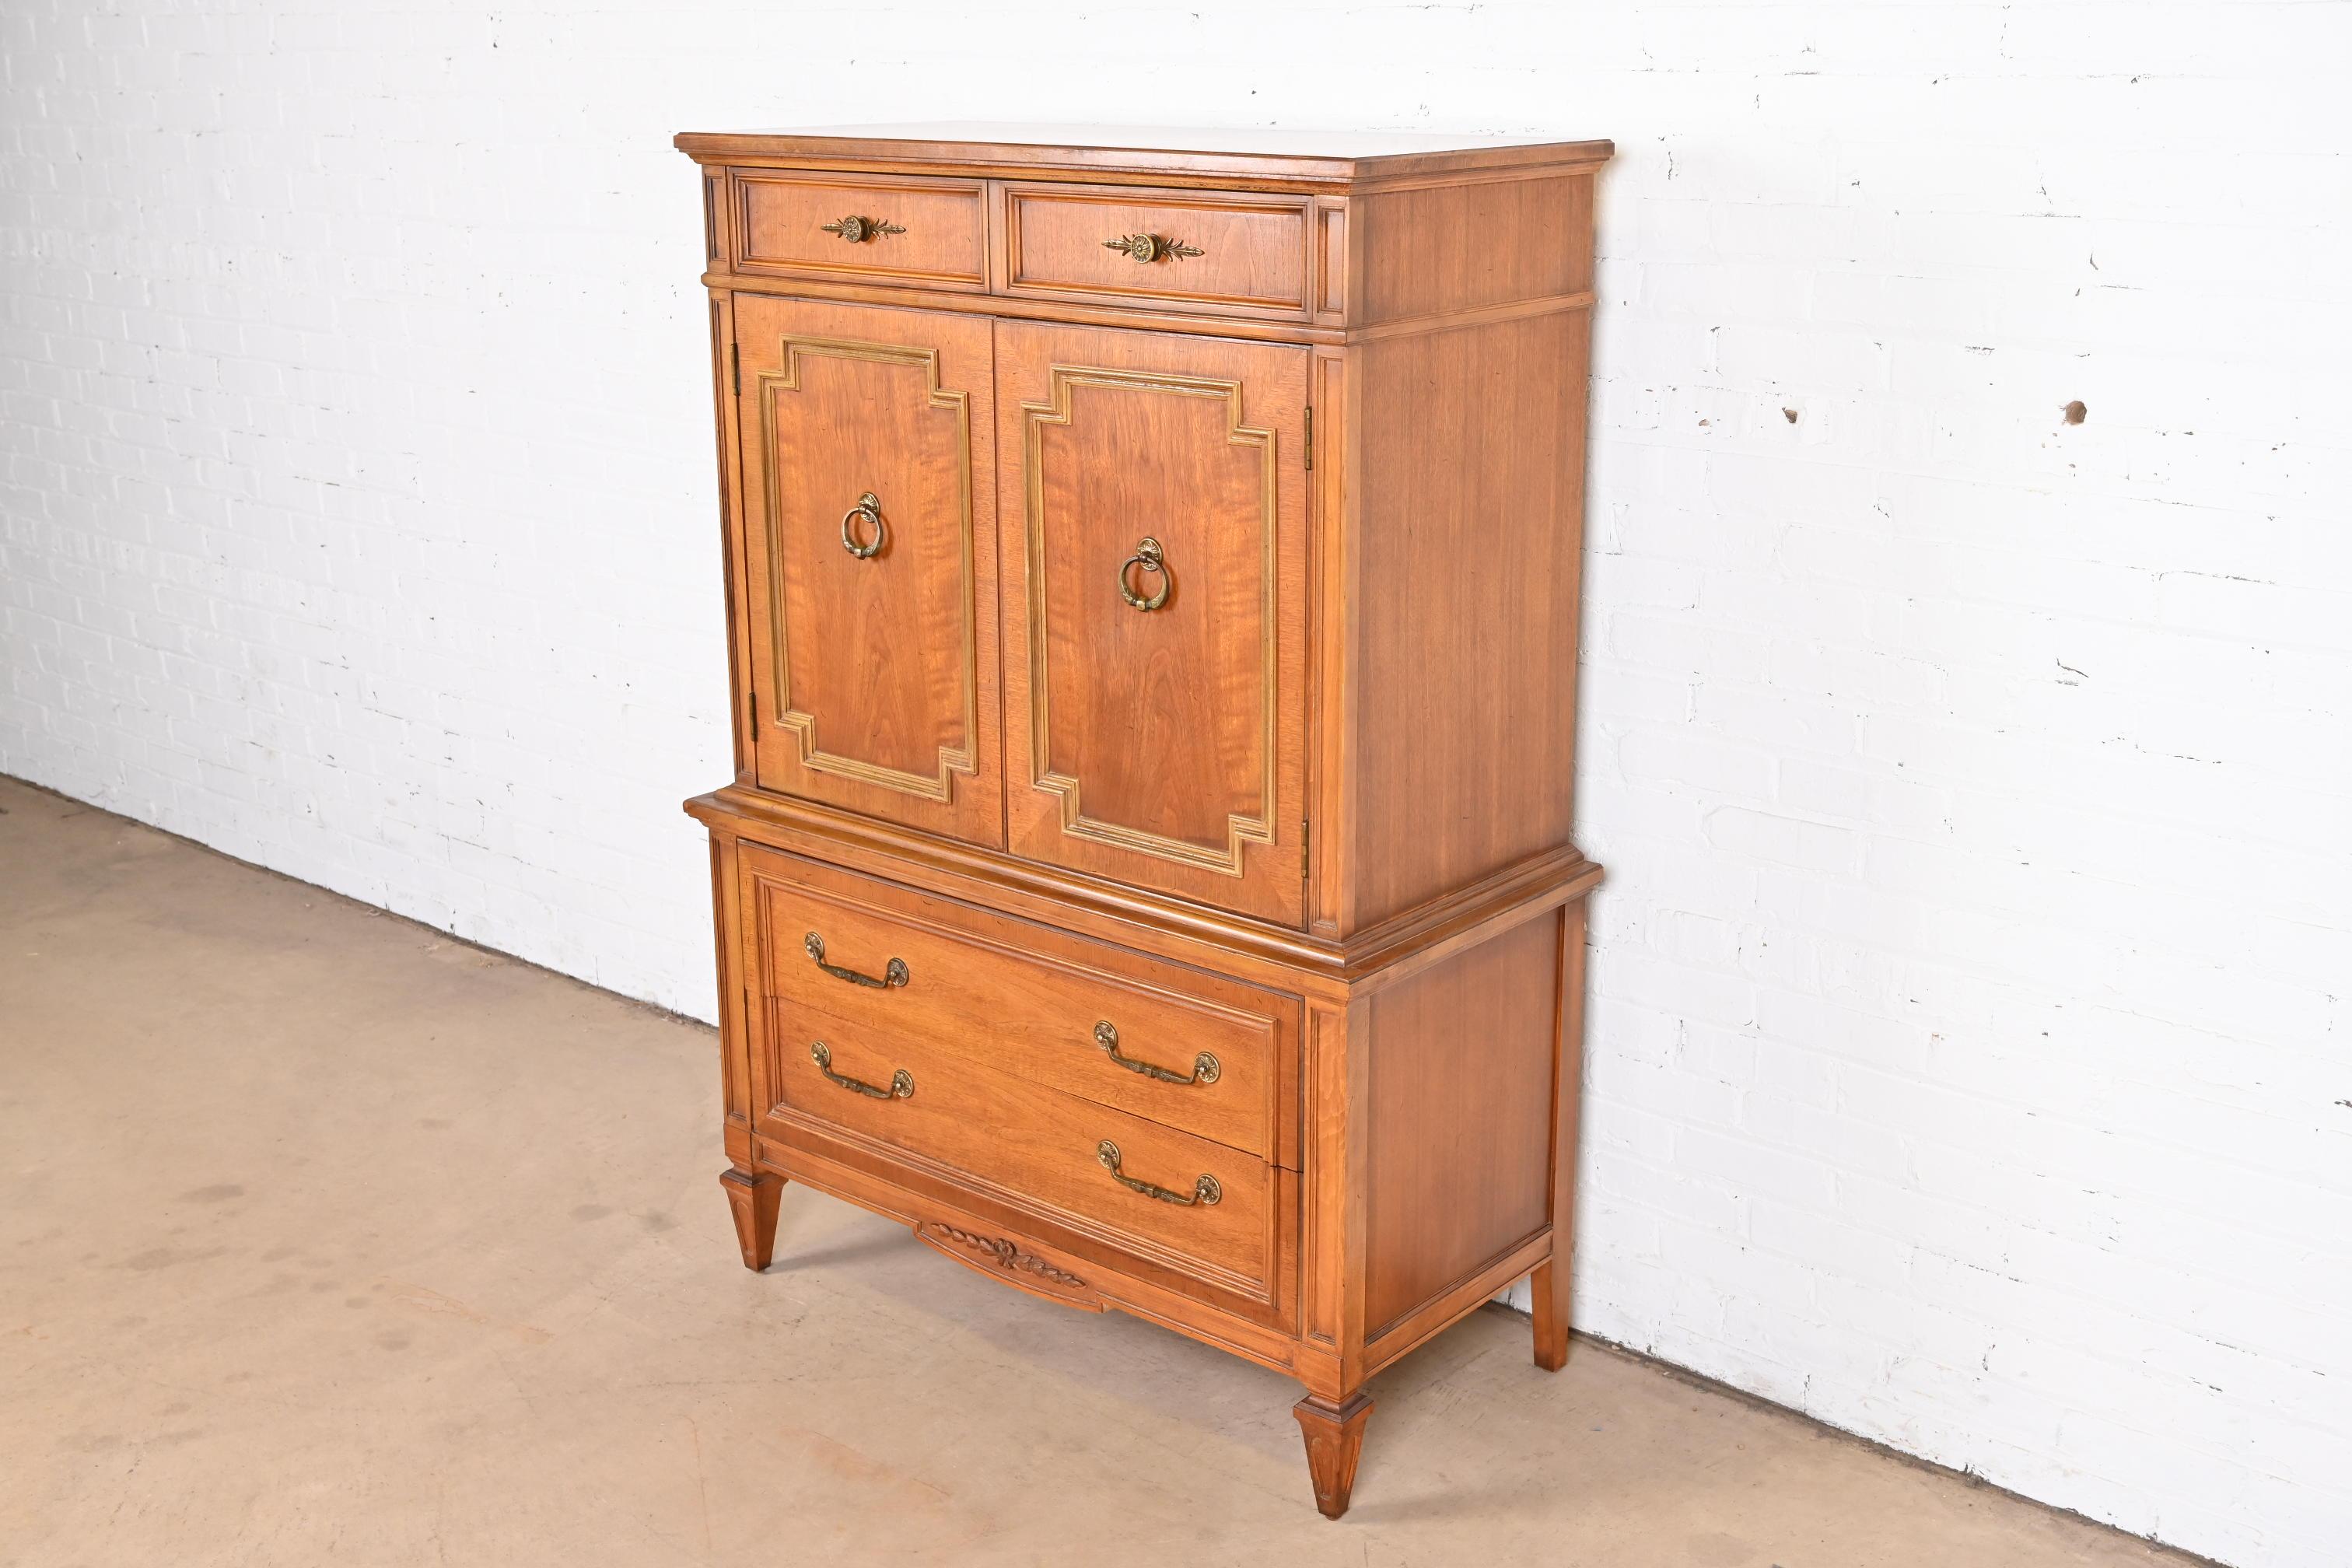 A gorgeous midcentury French Regency Louis XVI gentleman's chest or highboy dresser

By Thomasville

USA, 1950s

Carved walnut, with original brass hardware.

Measures: 42